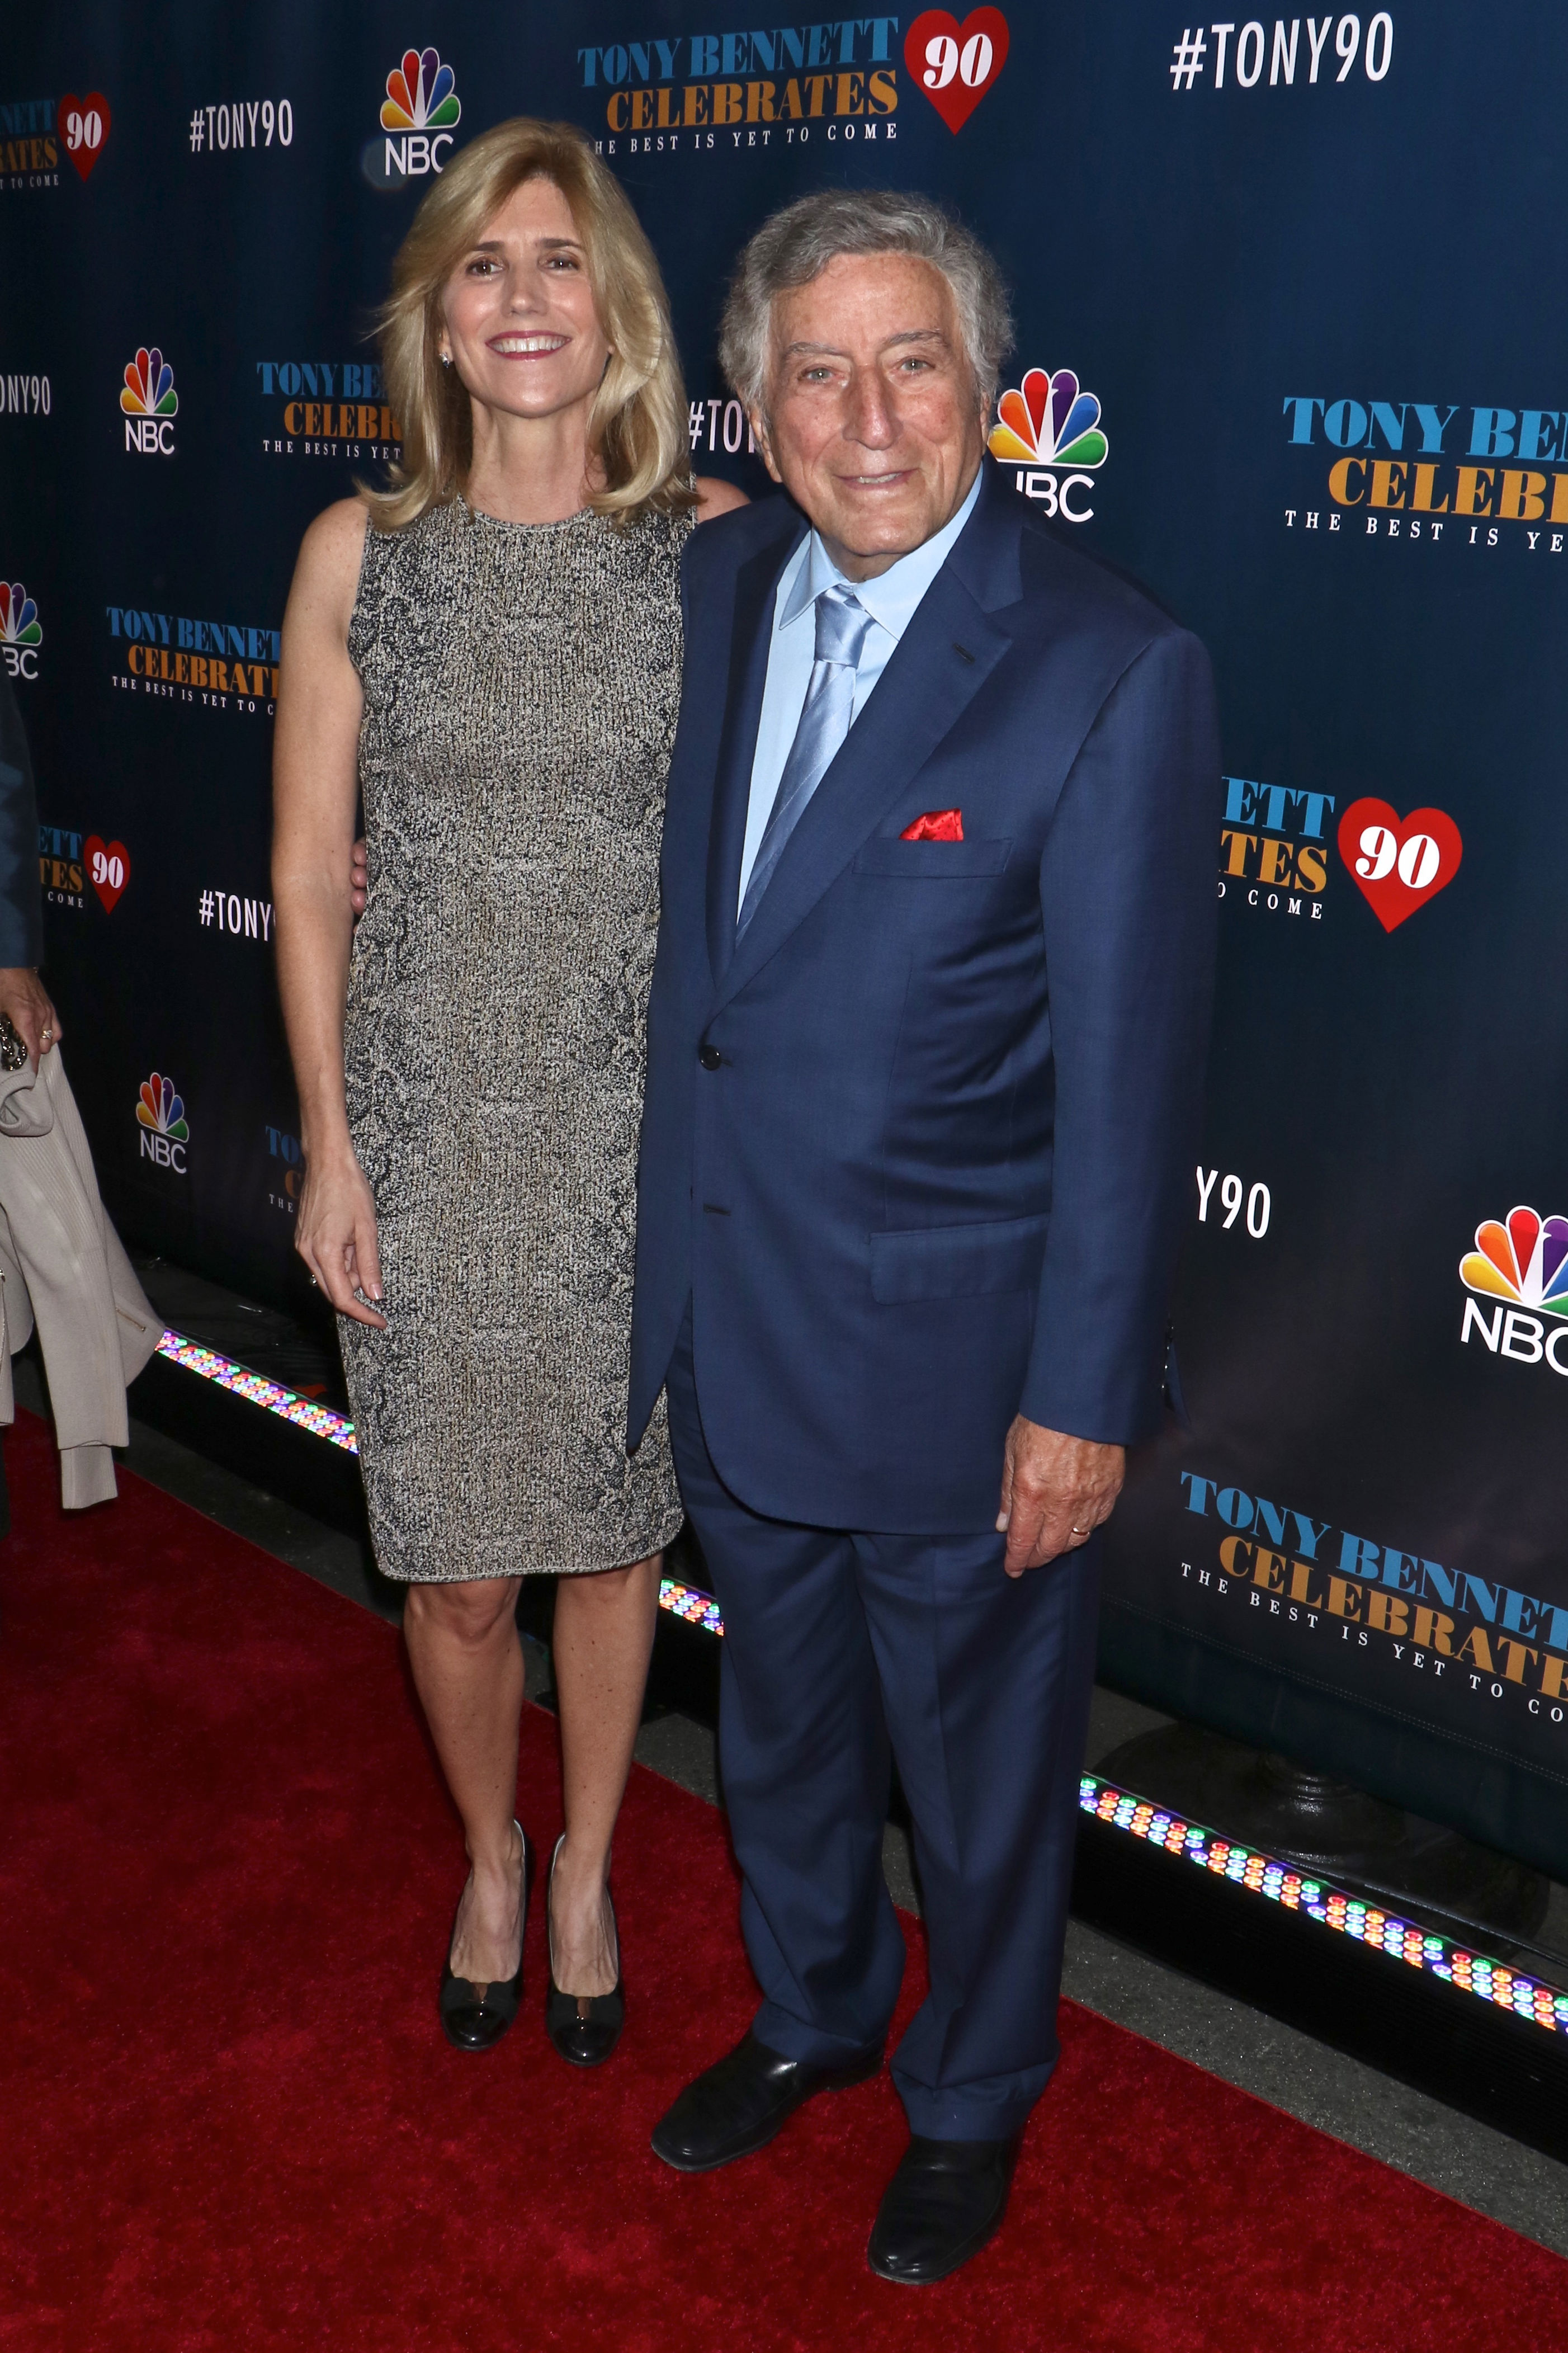 <p>Susan Crow is Tony Bennett's third wife, and she is 40 years younger than the singer, to whom she's been married since 2007. In Tony's memoir, "Just Getting Started," he wrote that he "met" Susan when her mother was pregnant with her during a meet-and-greet in New York in 1966. Weird.</p>